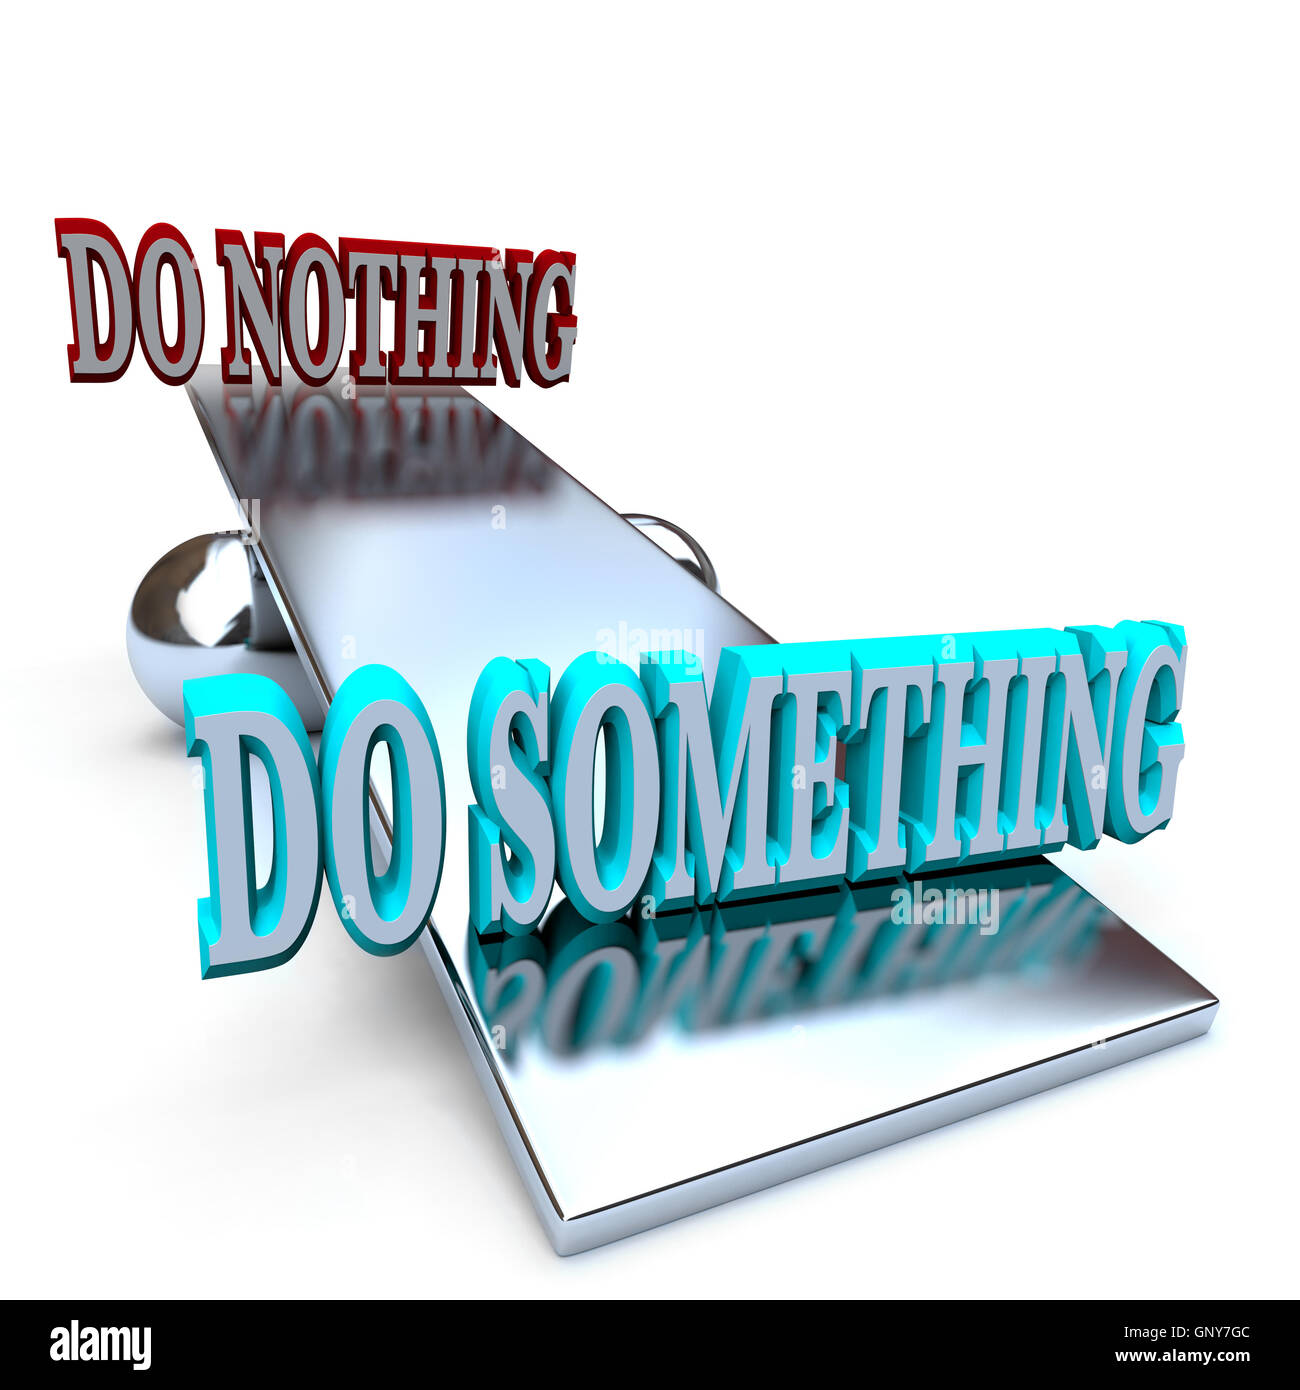 Do Something vs Doing Nothing - Taking a Stand Stock Photo